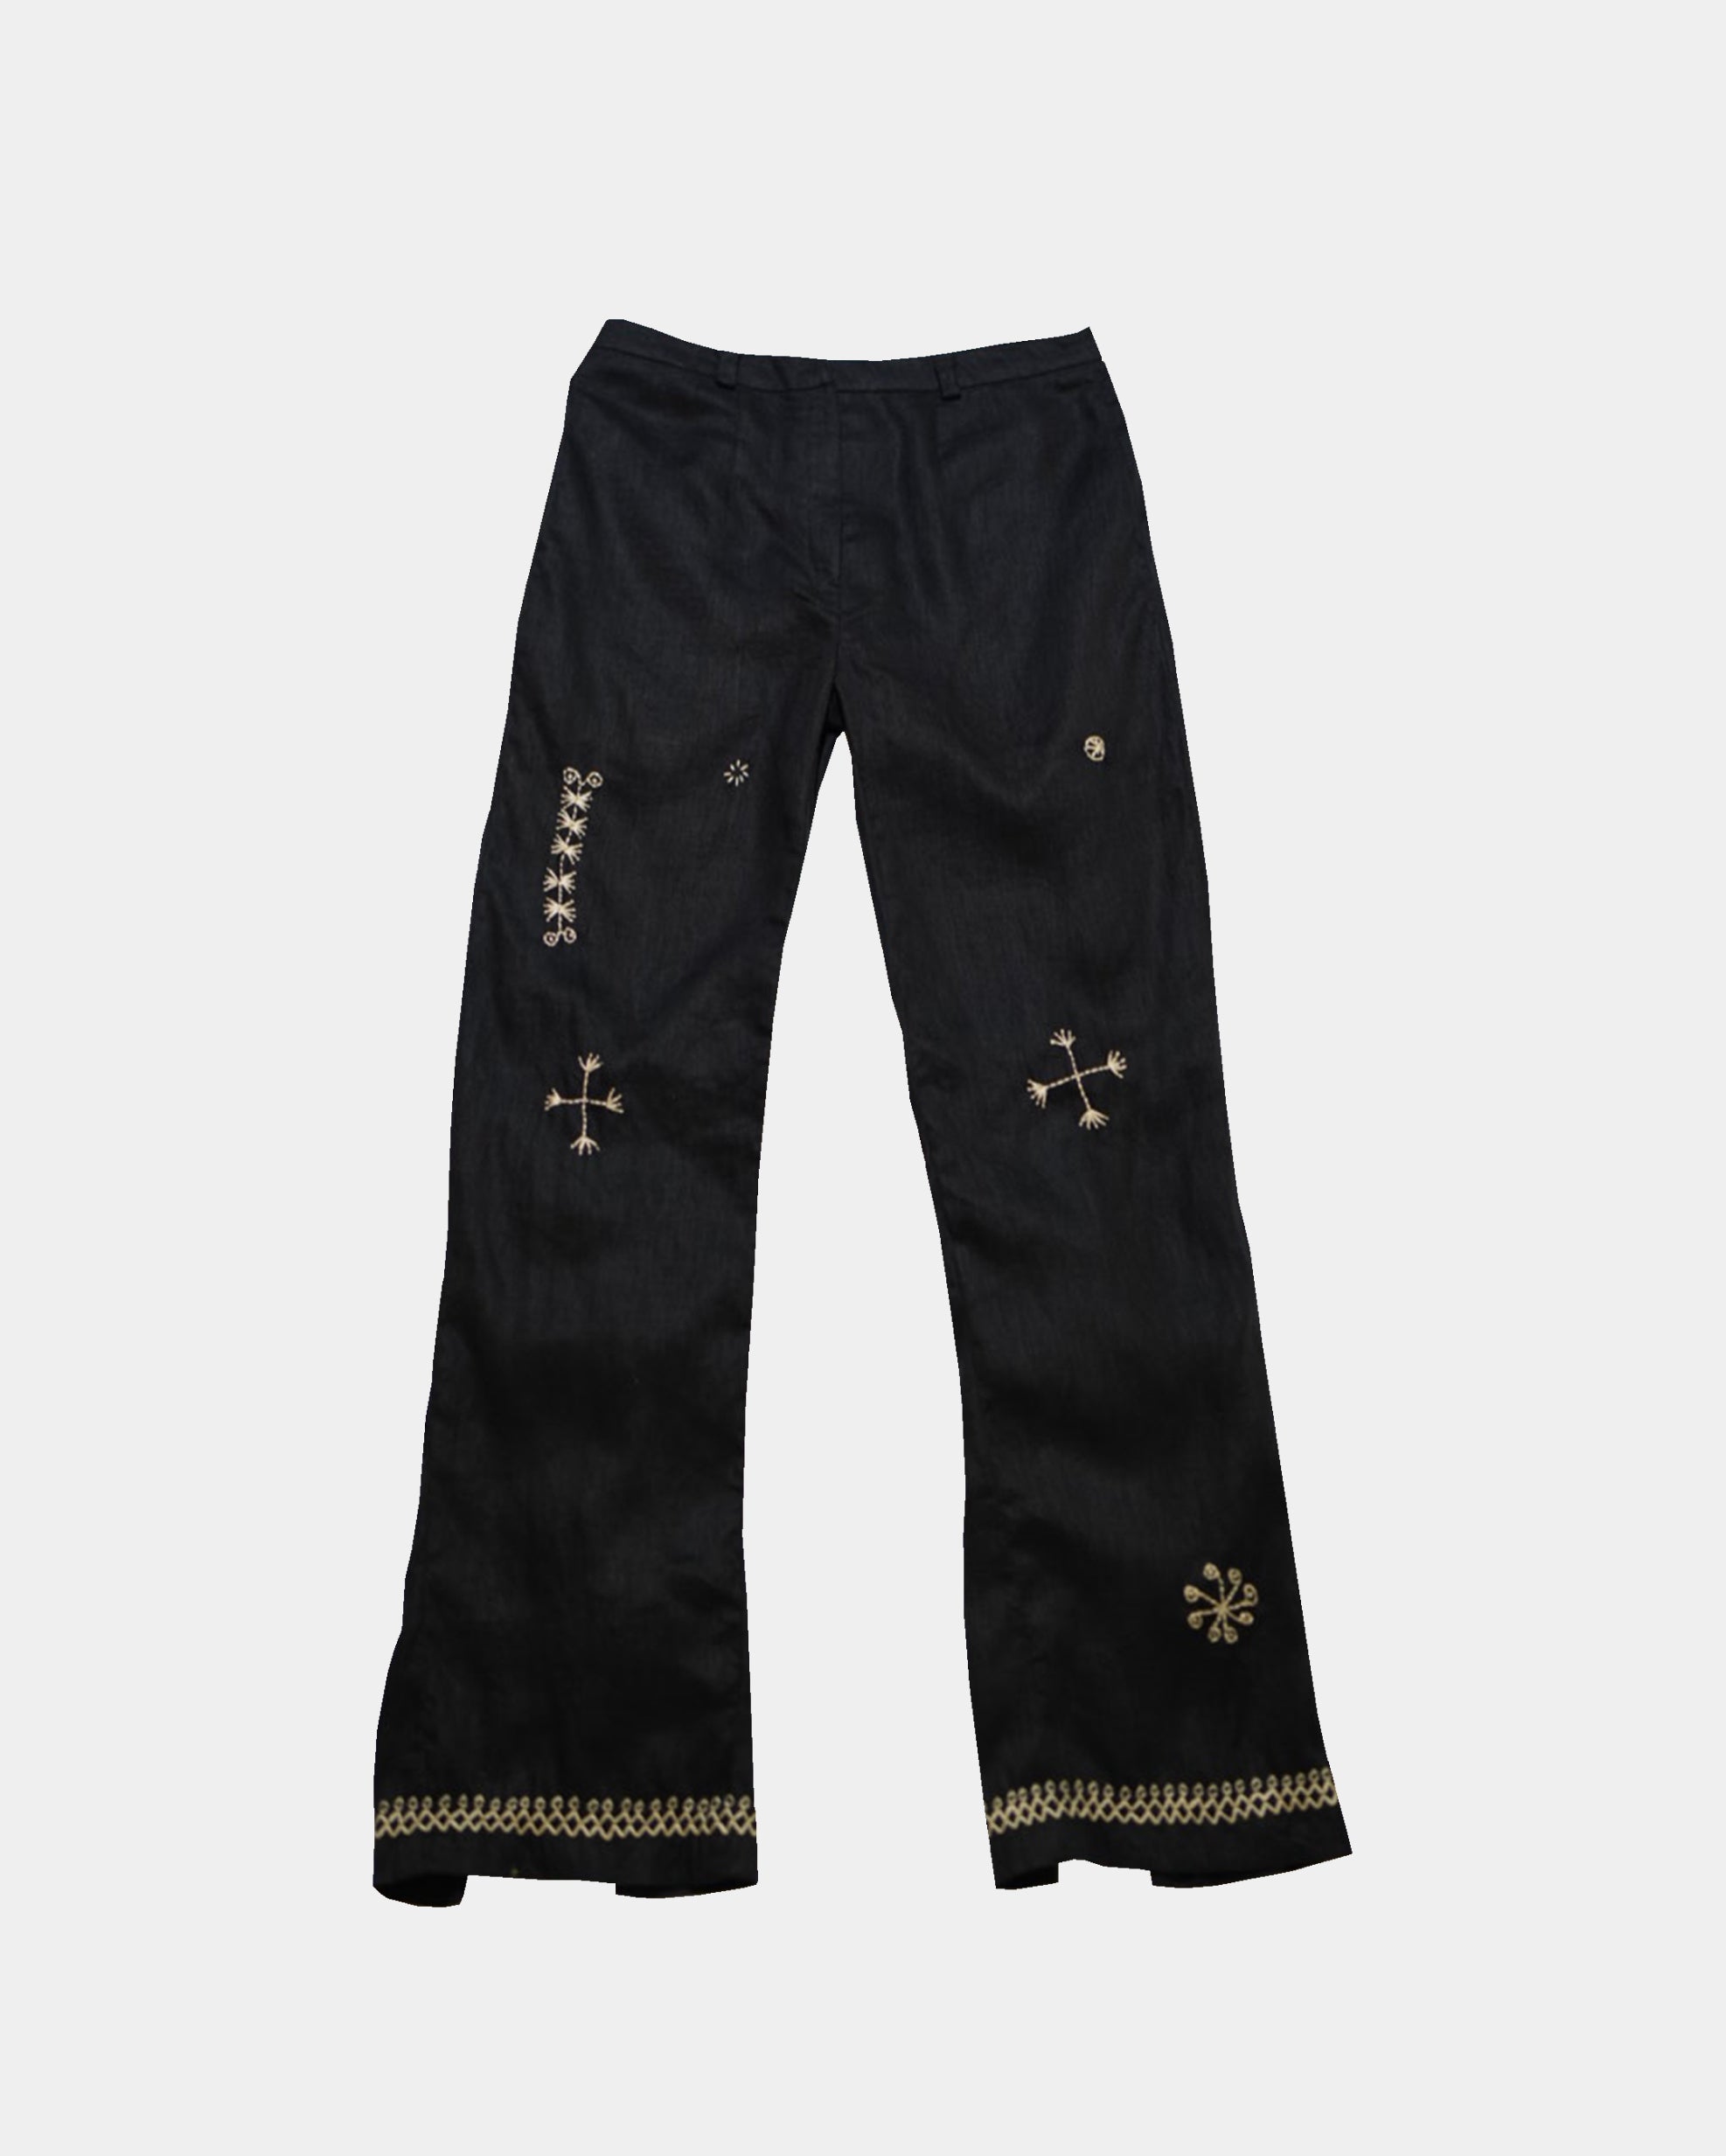 Embroidered Tie Trousers